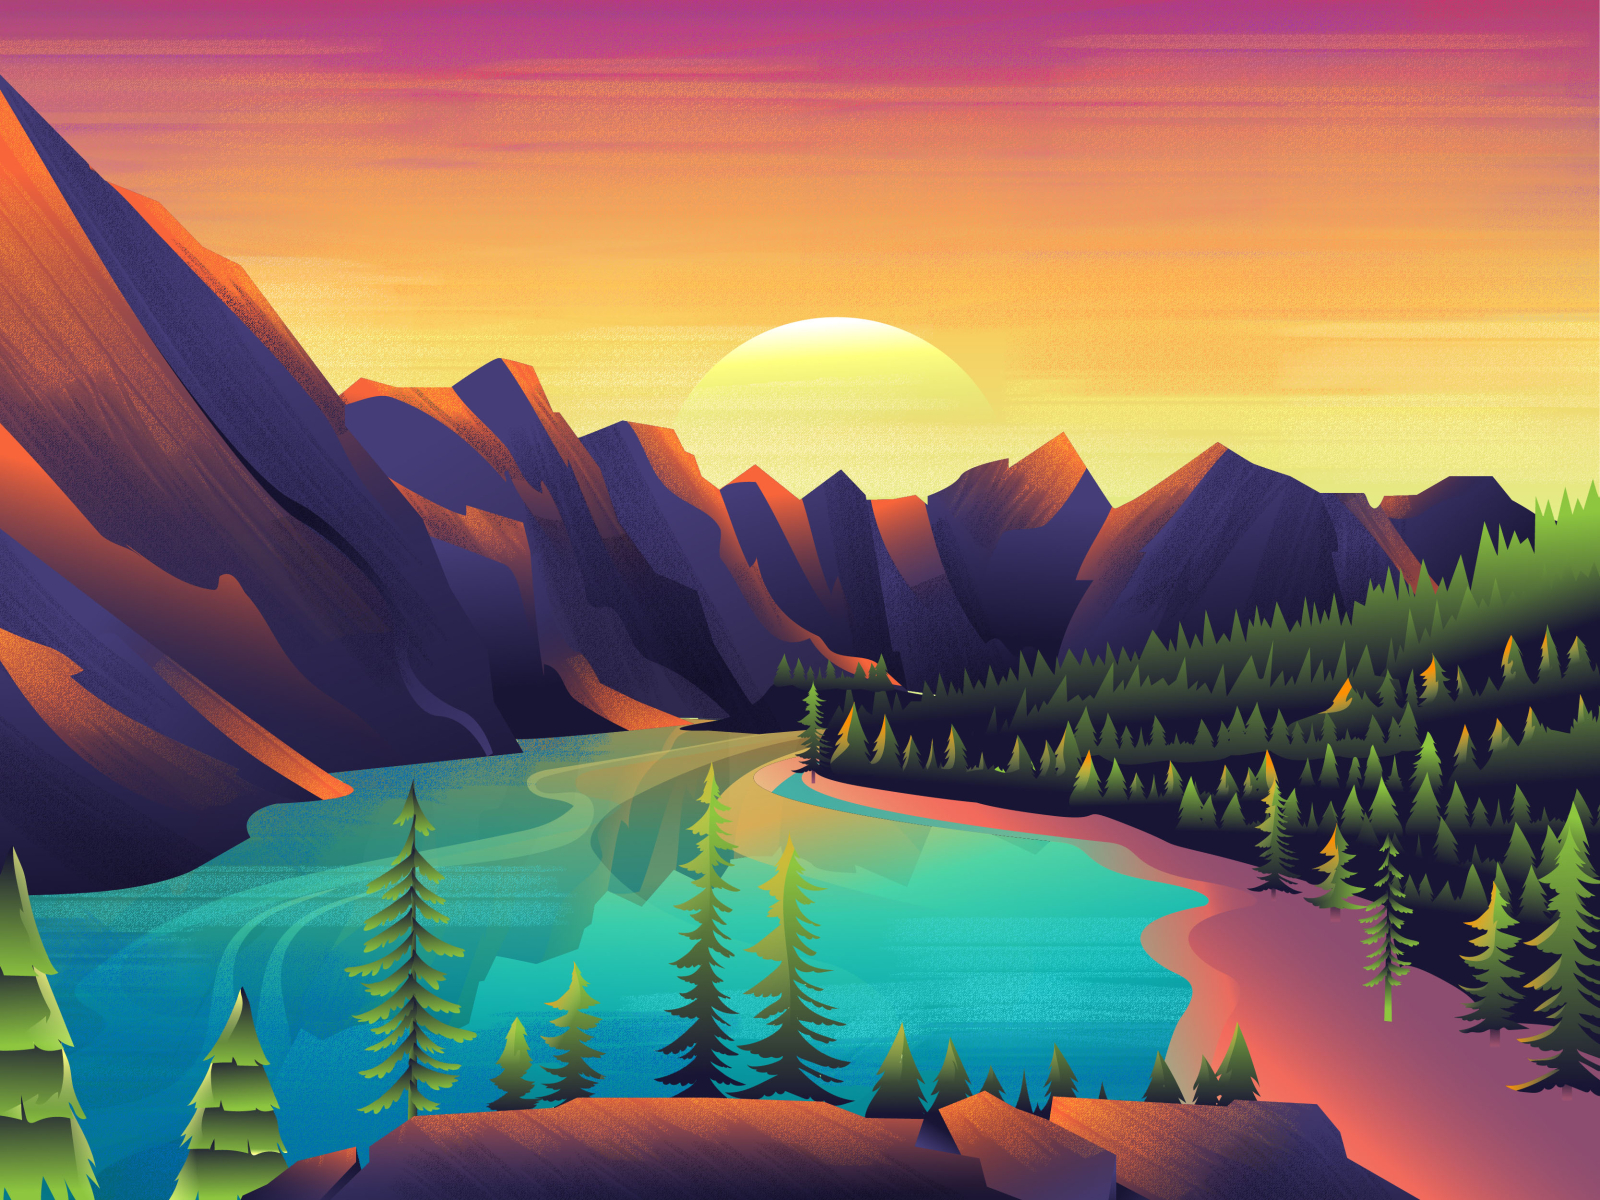 Among Trees by Blessy Paulraj on Dribbble